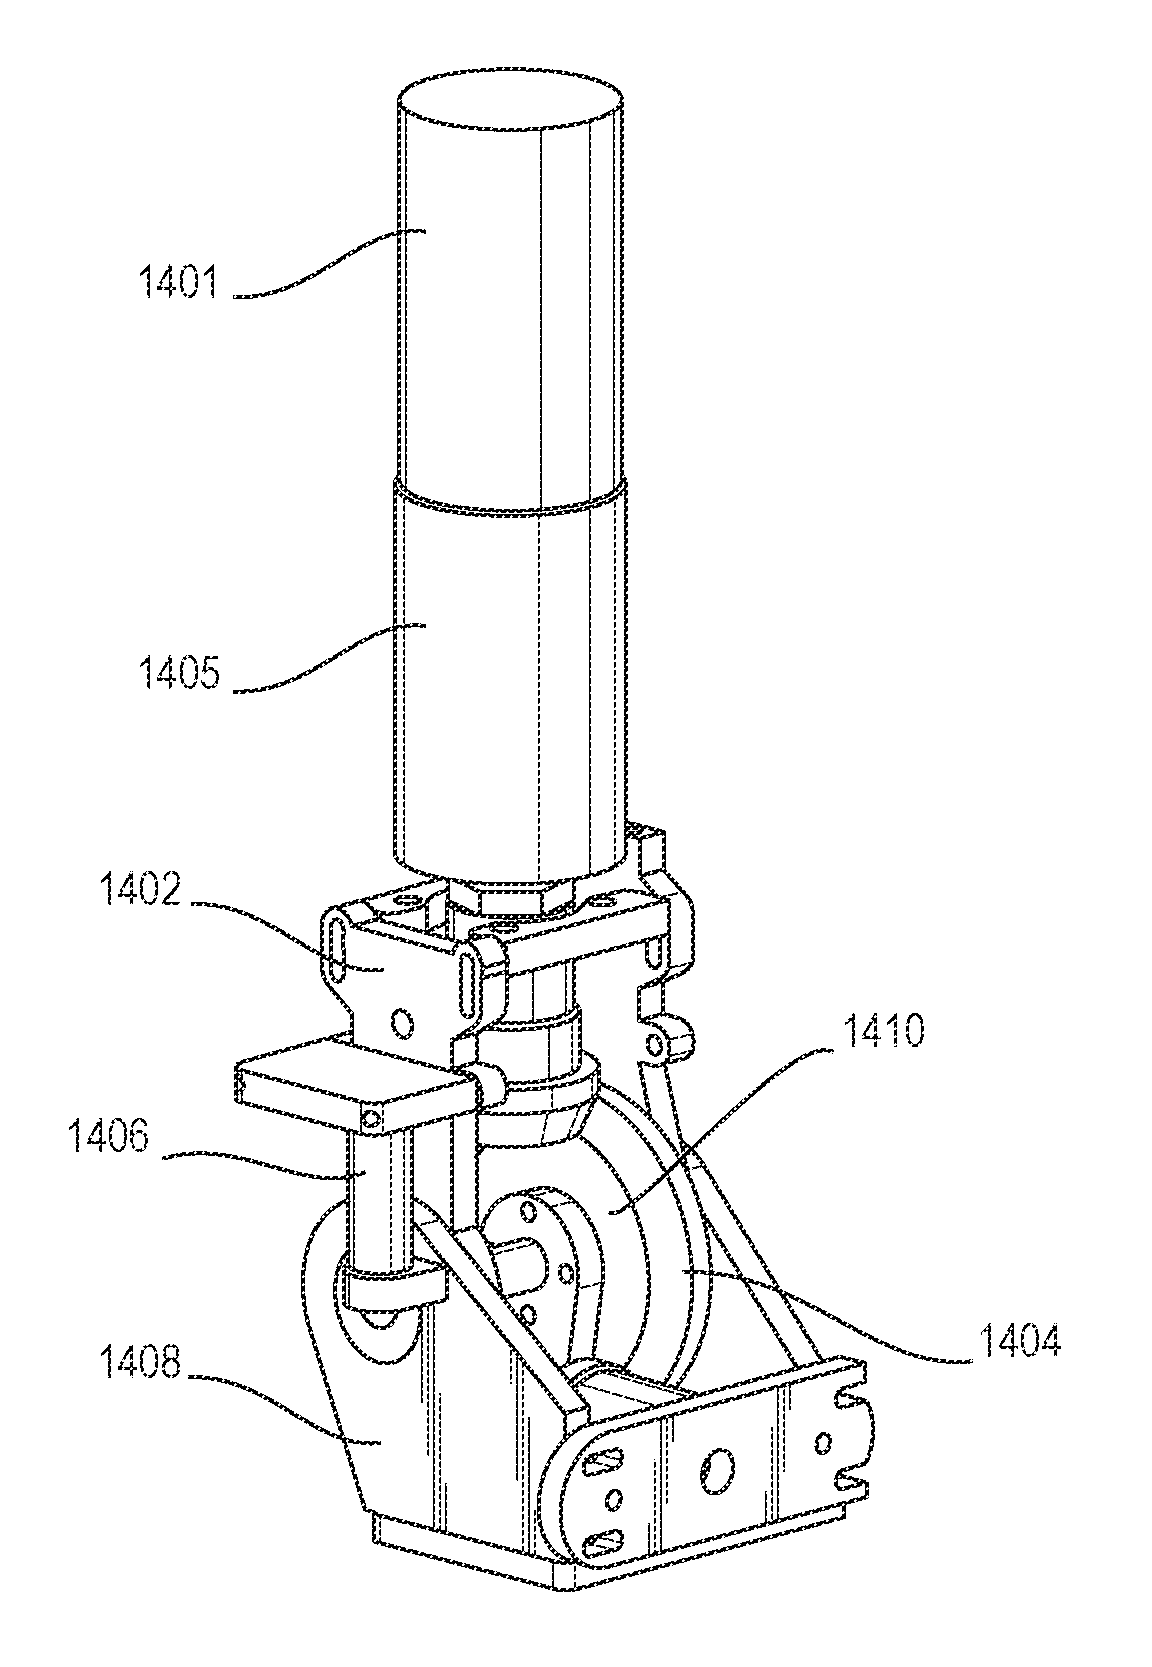 Artificial Human Limbs and Joints Employing Actuators, Springs, and Variable-Damper Elements